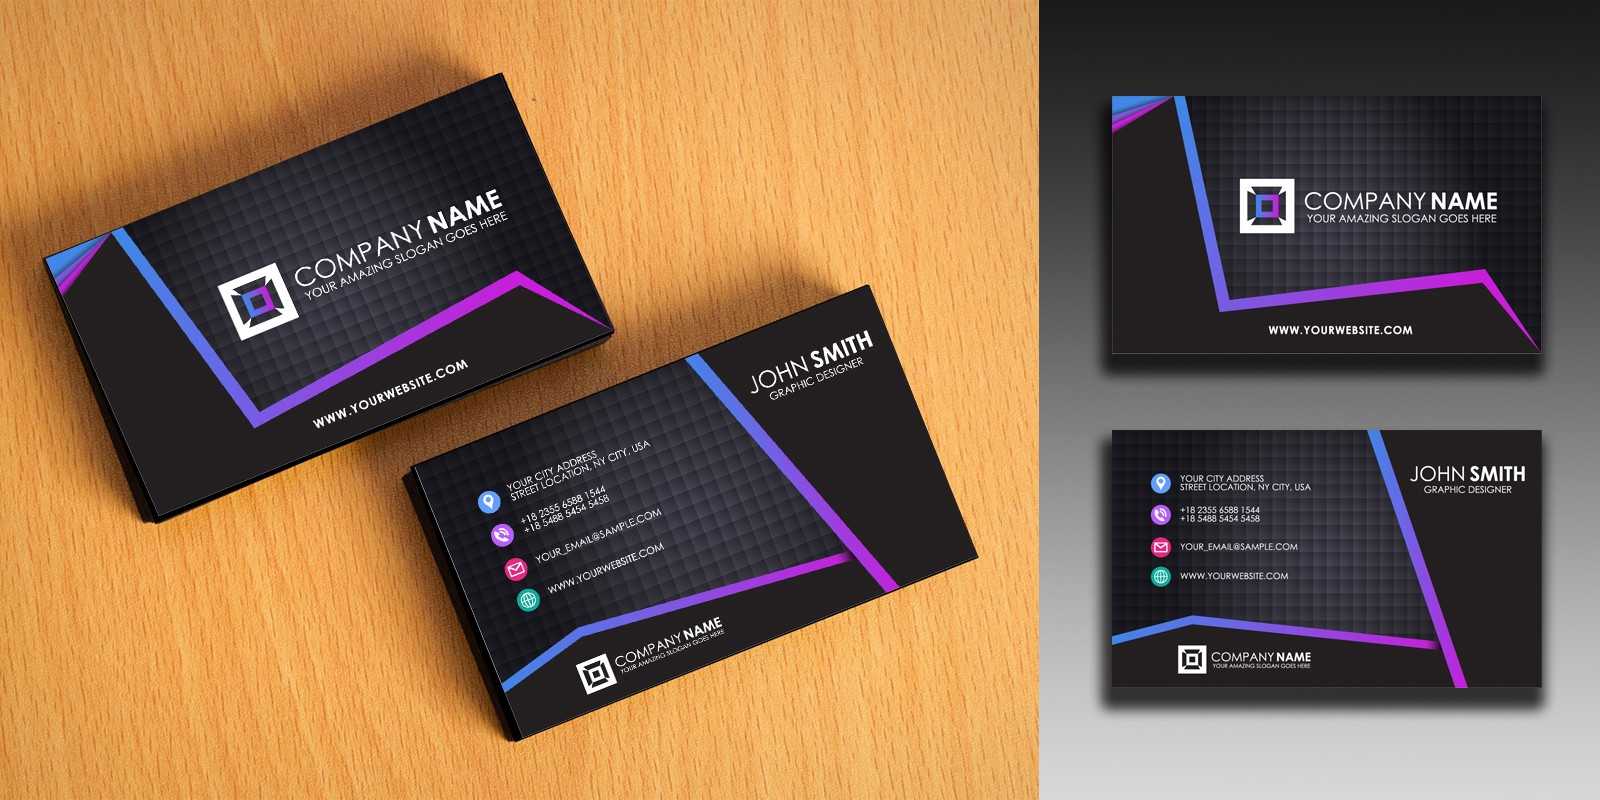 Clean And Simple Business Card Template With Regard To Buisness Card Templates